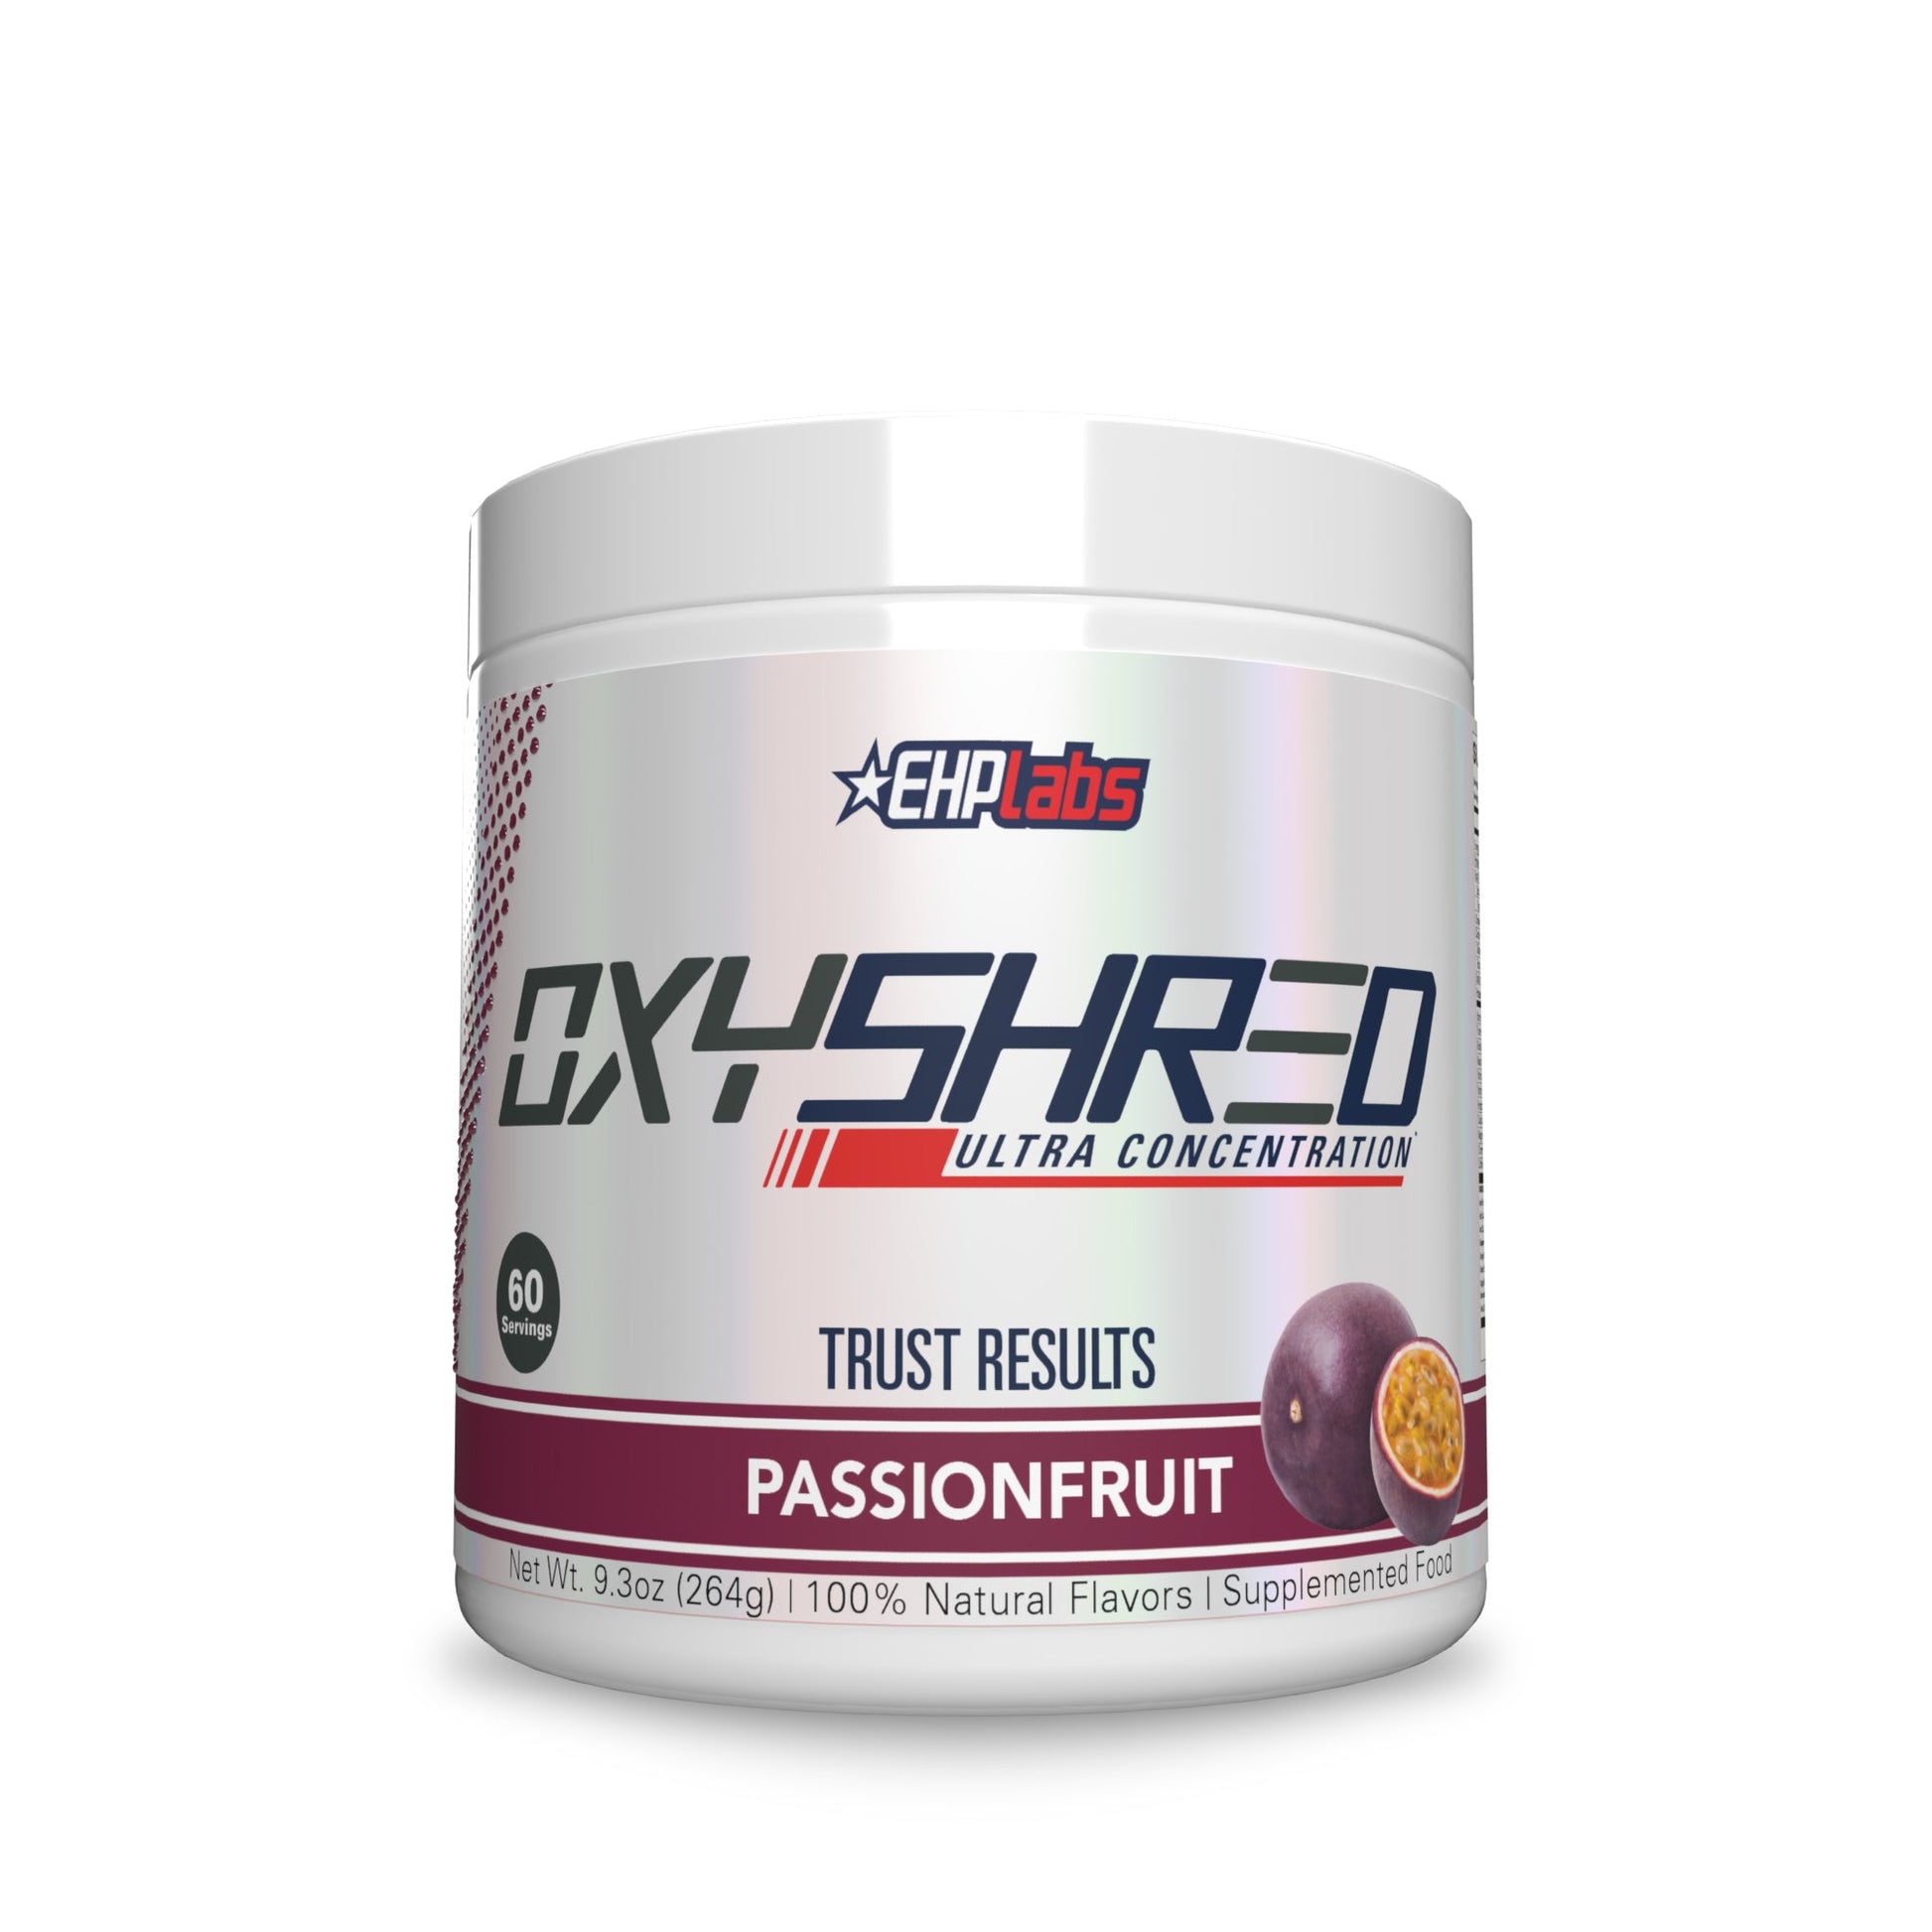 EHP Labs OxyShred Ultra Concentration 60 Serves - Supplements - Passionfruit - The Cave Gym